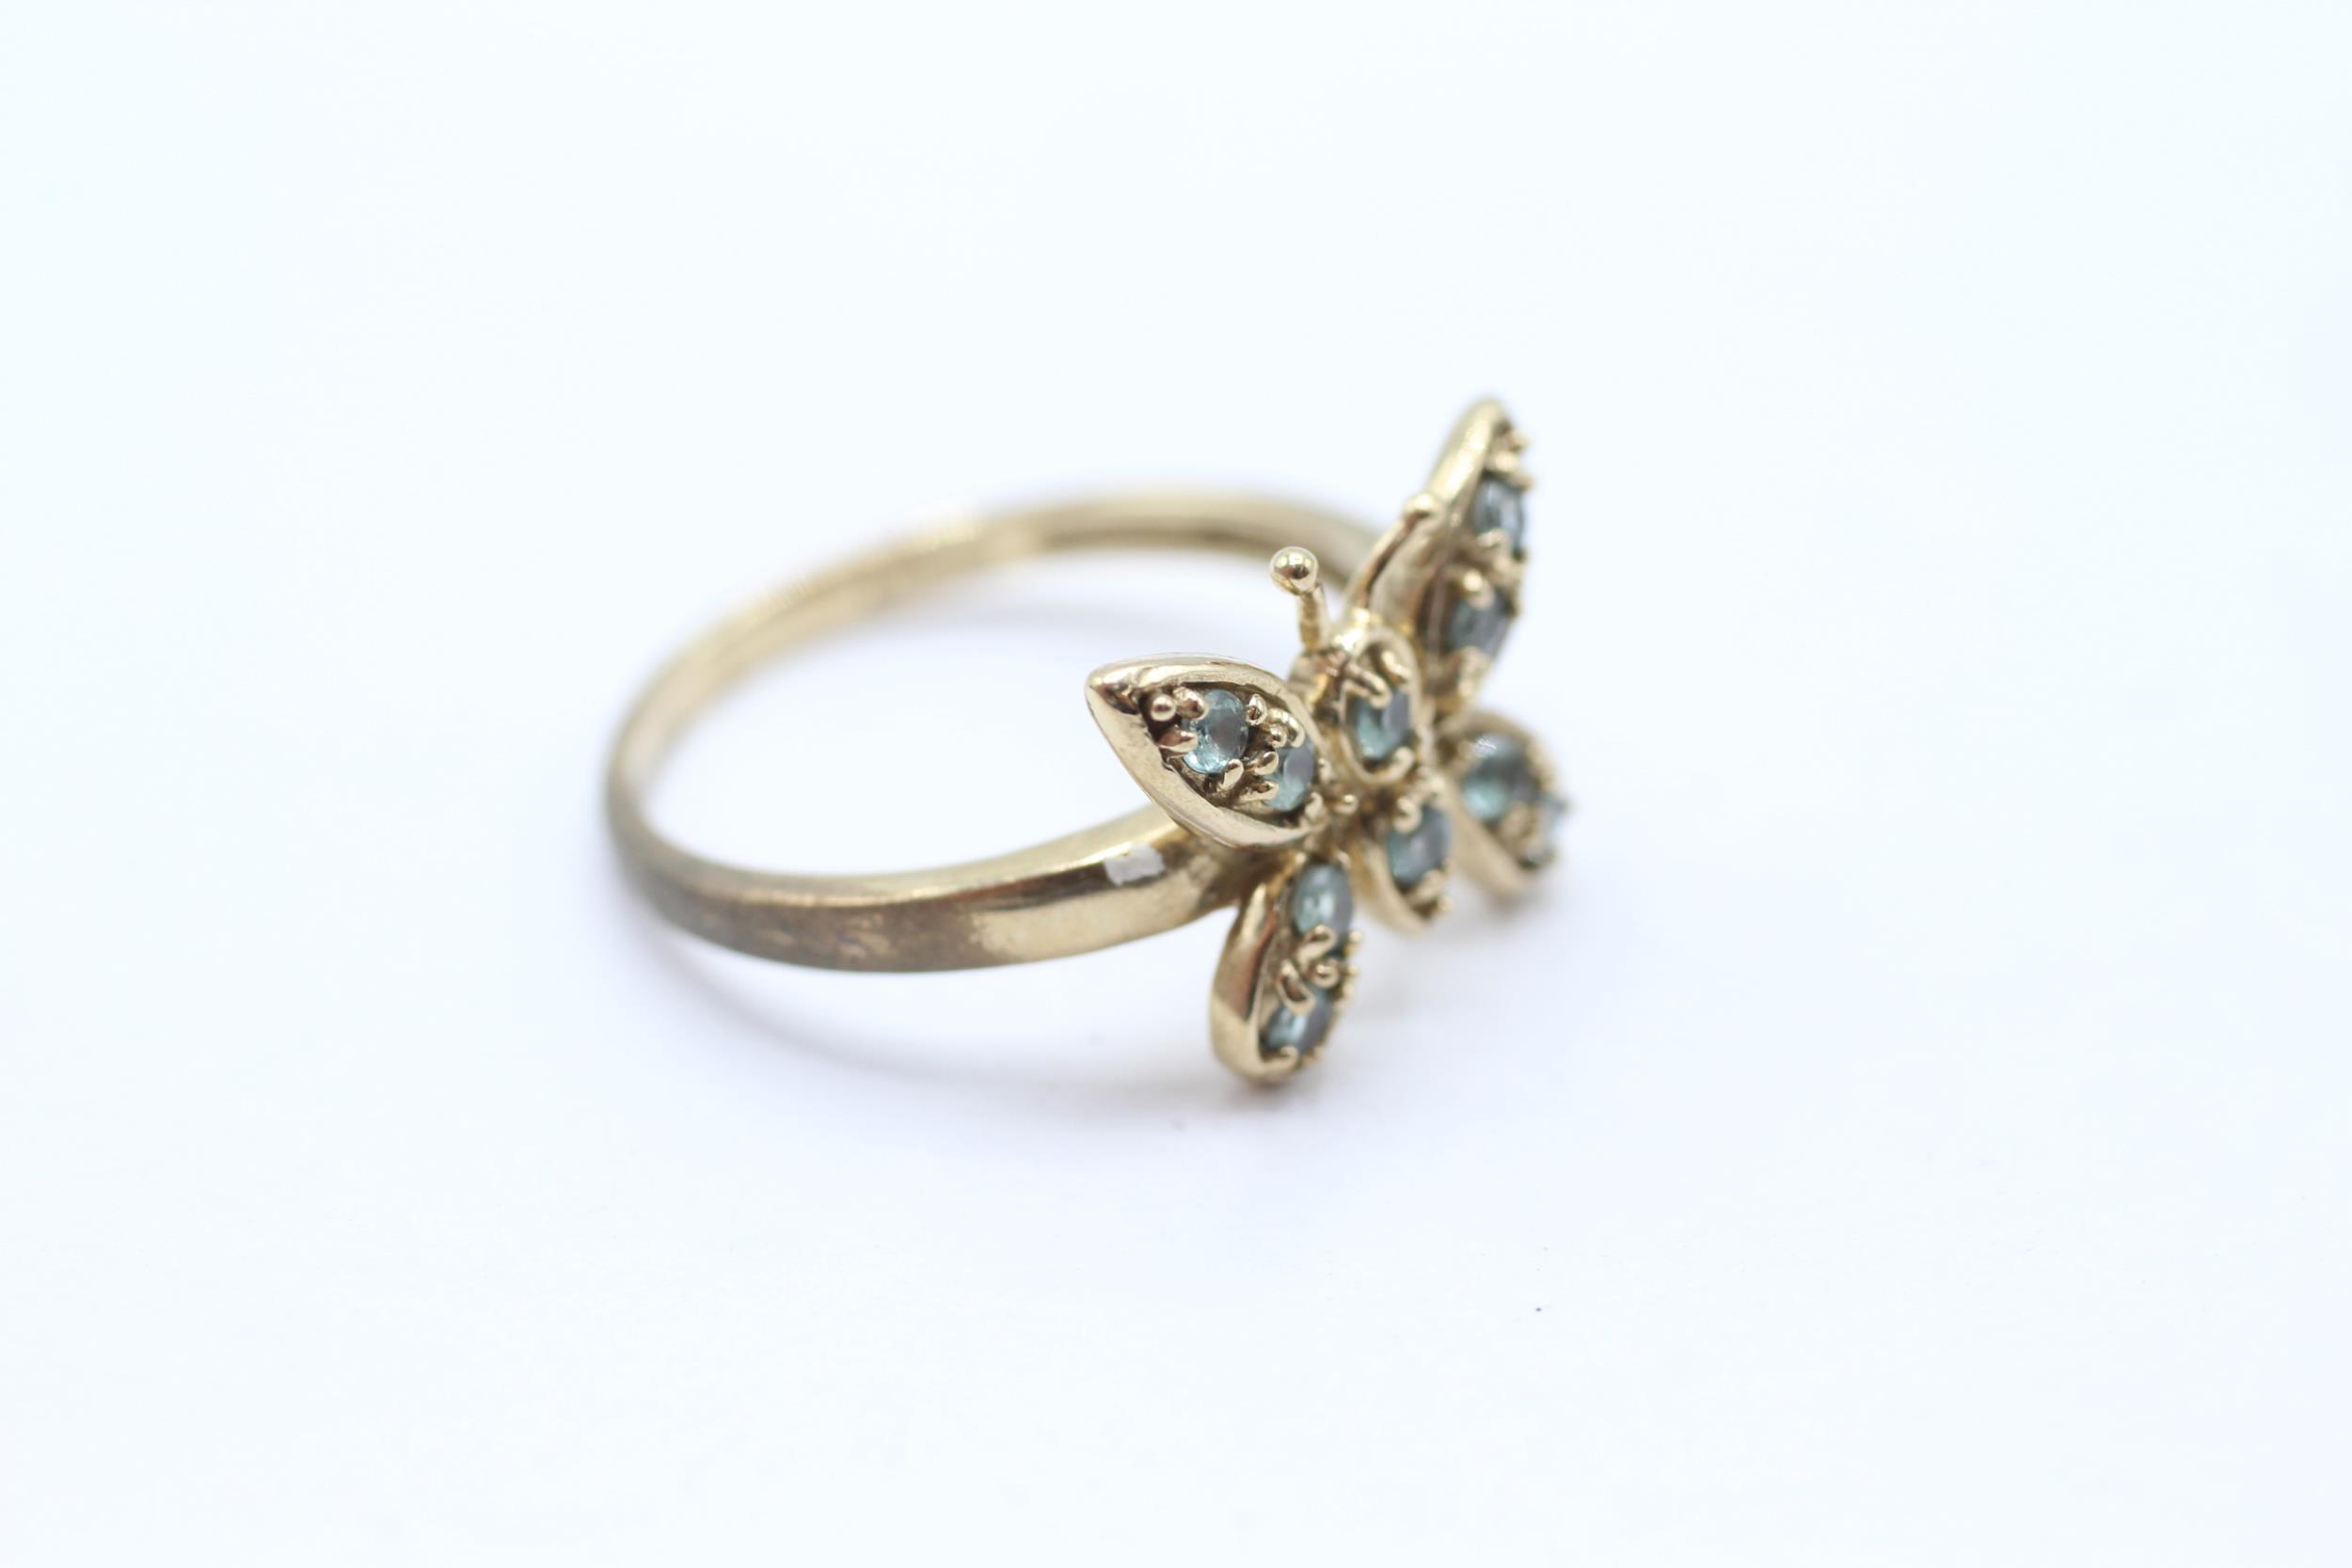 9ct gold blue gemstone butterfly dress ring Size N - 2.5 g - Image 2 of 4